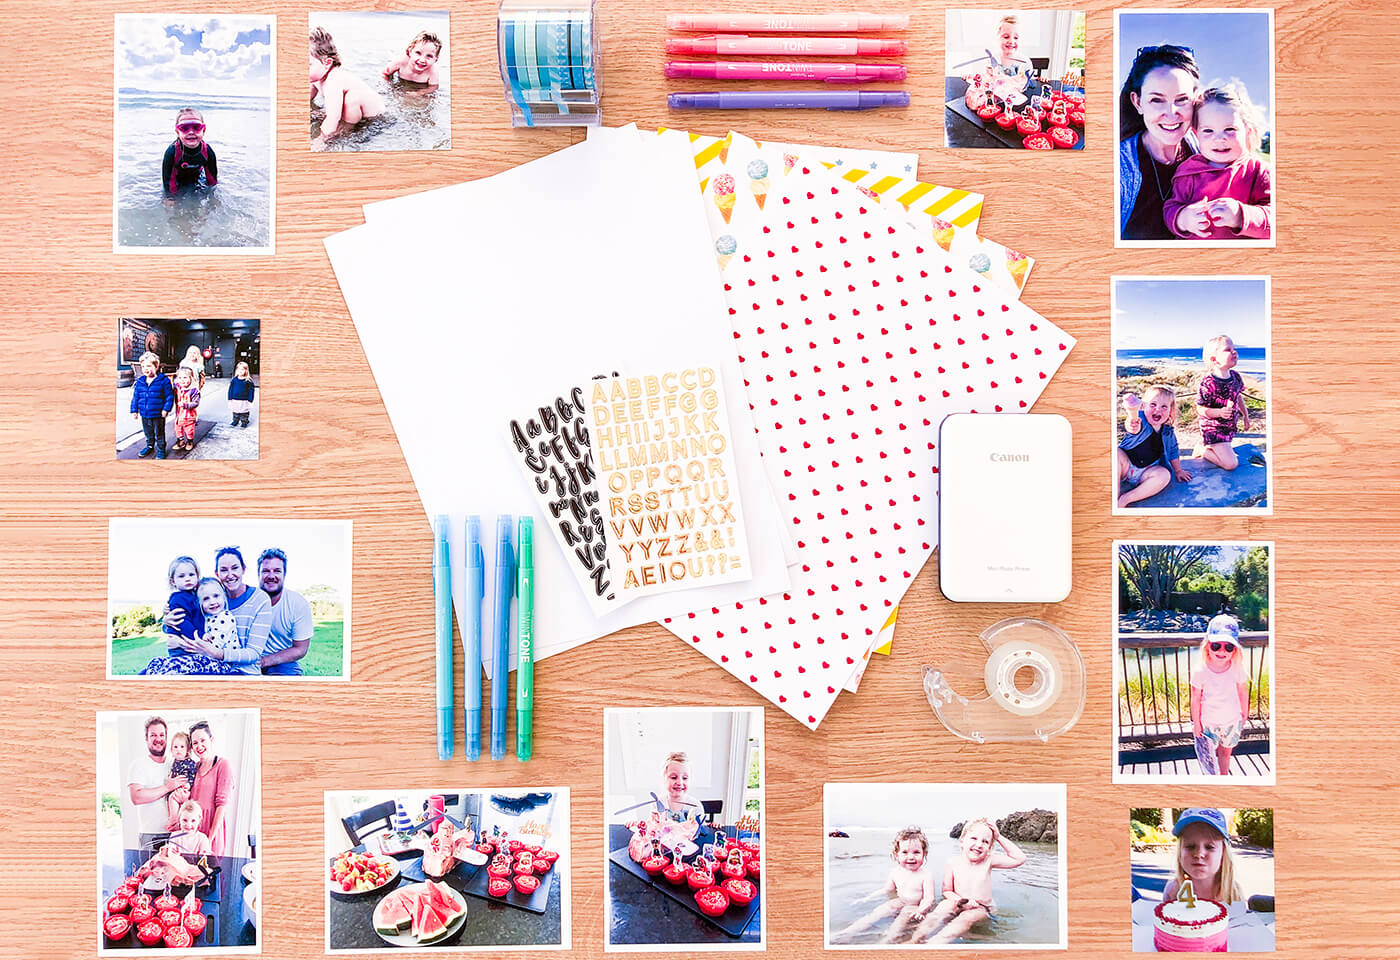 Best scrapbook ideas for beginners – tips from the experts